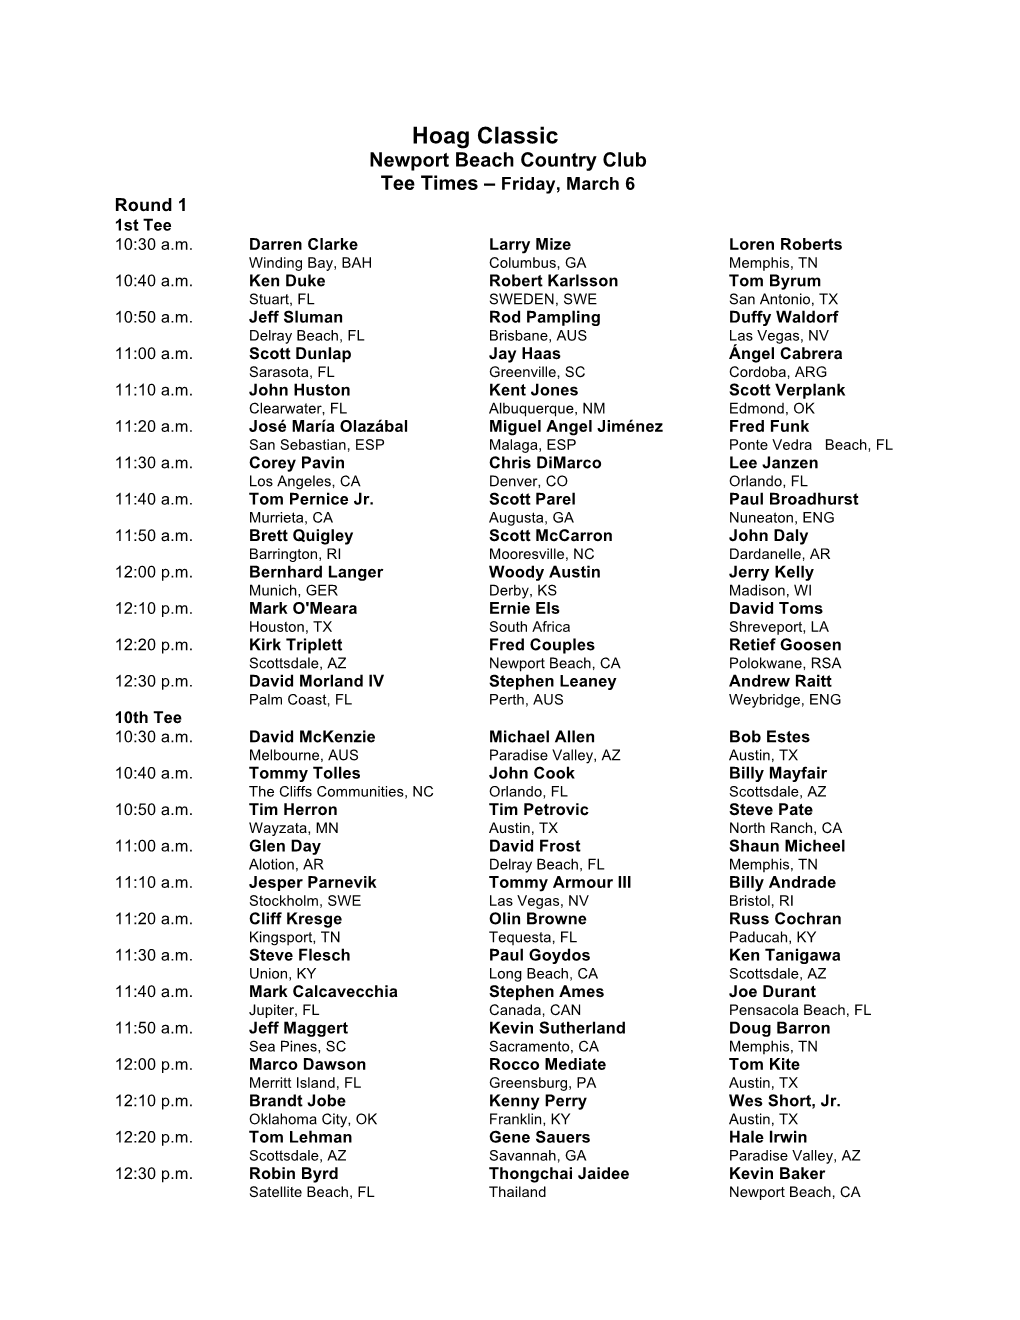 Hoag Classic Newport Beach Country Club Tee Times – Friday, March 6 Round 1 1St Tee 10:30 A.M